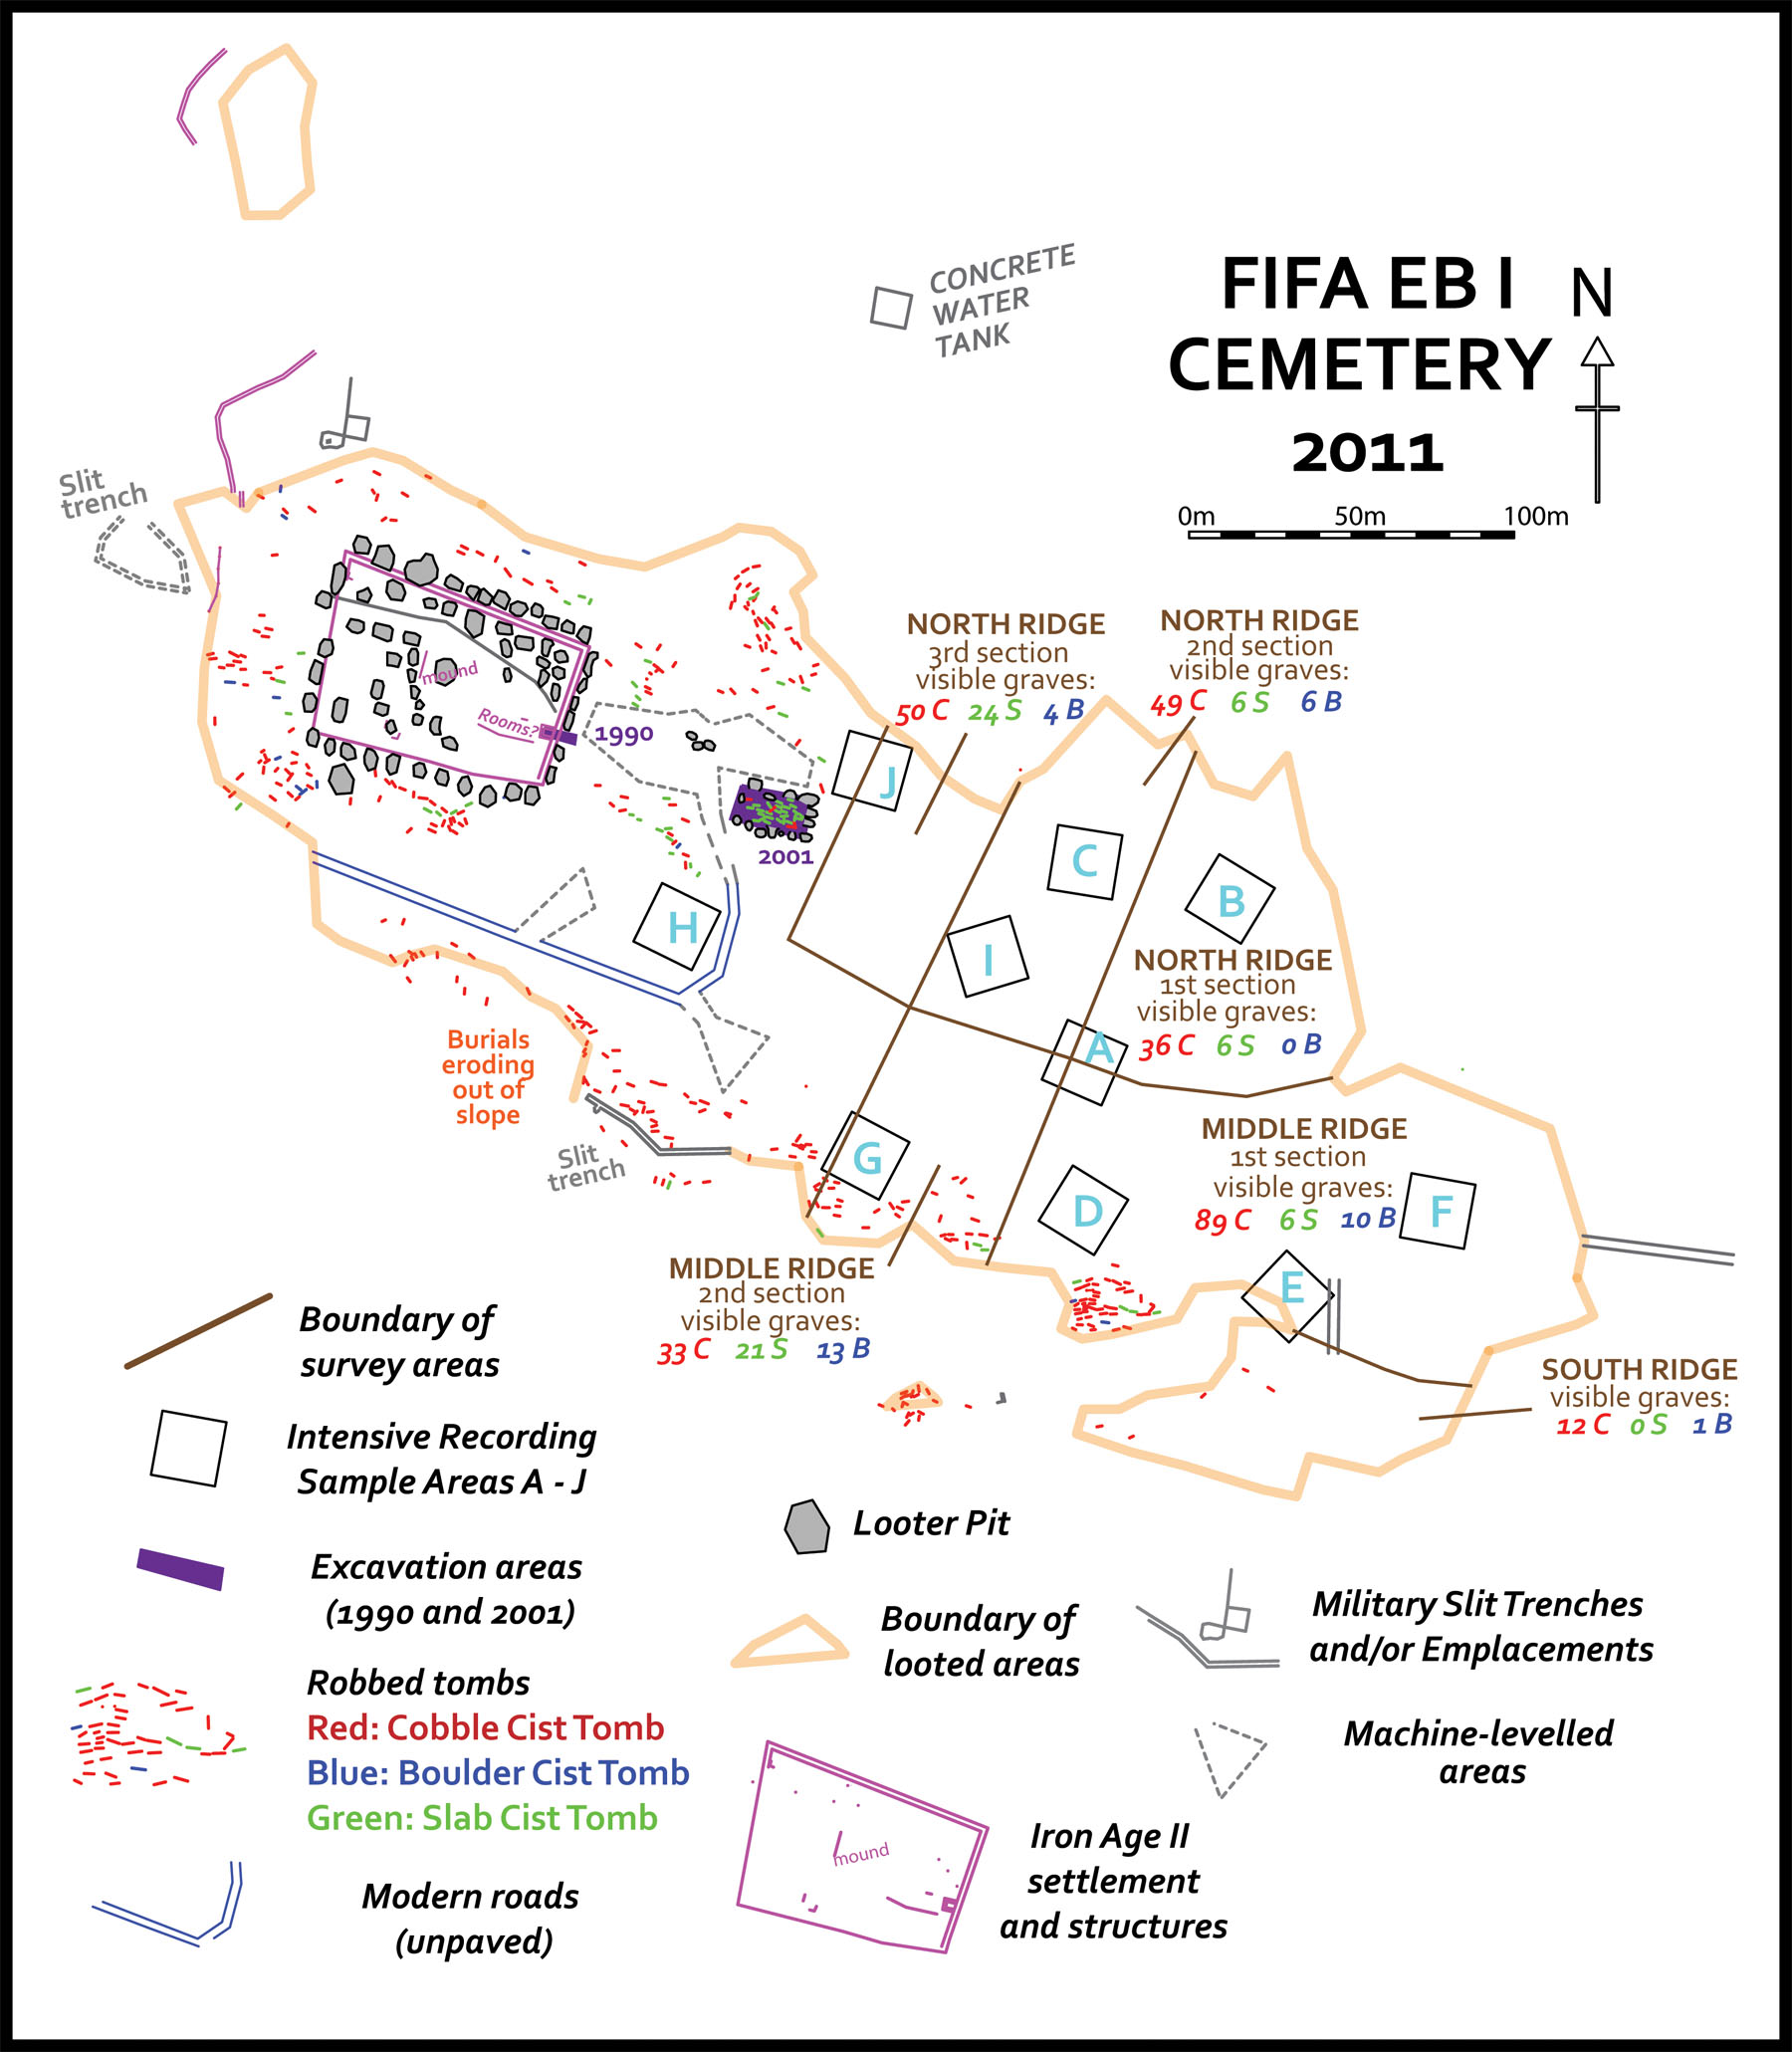 Fig. 11. Comprehensive plan of Fifa (courtesy Follow the Pots Project).